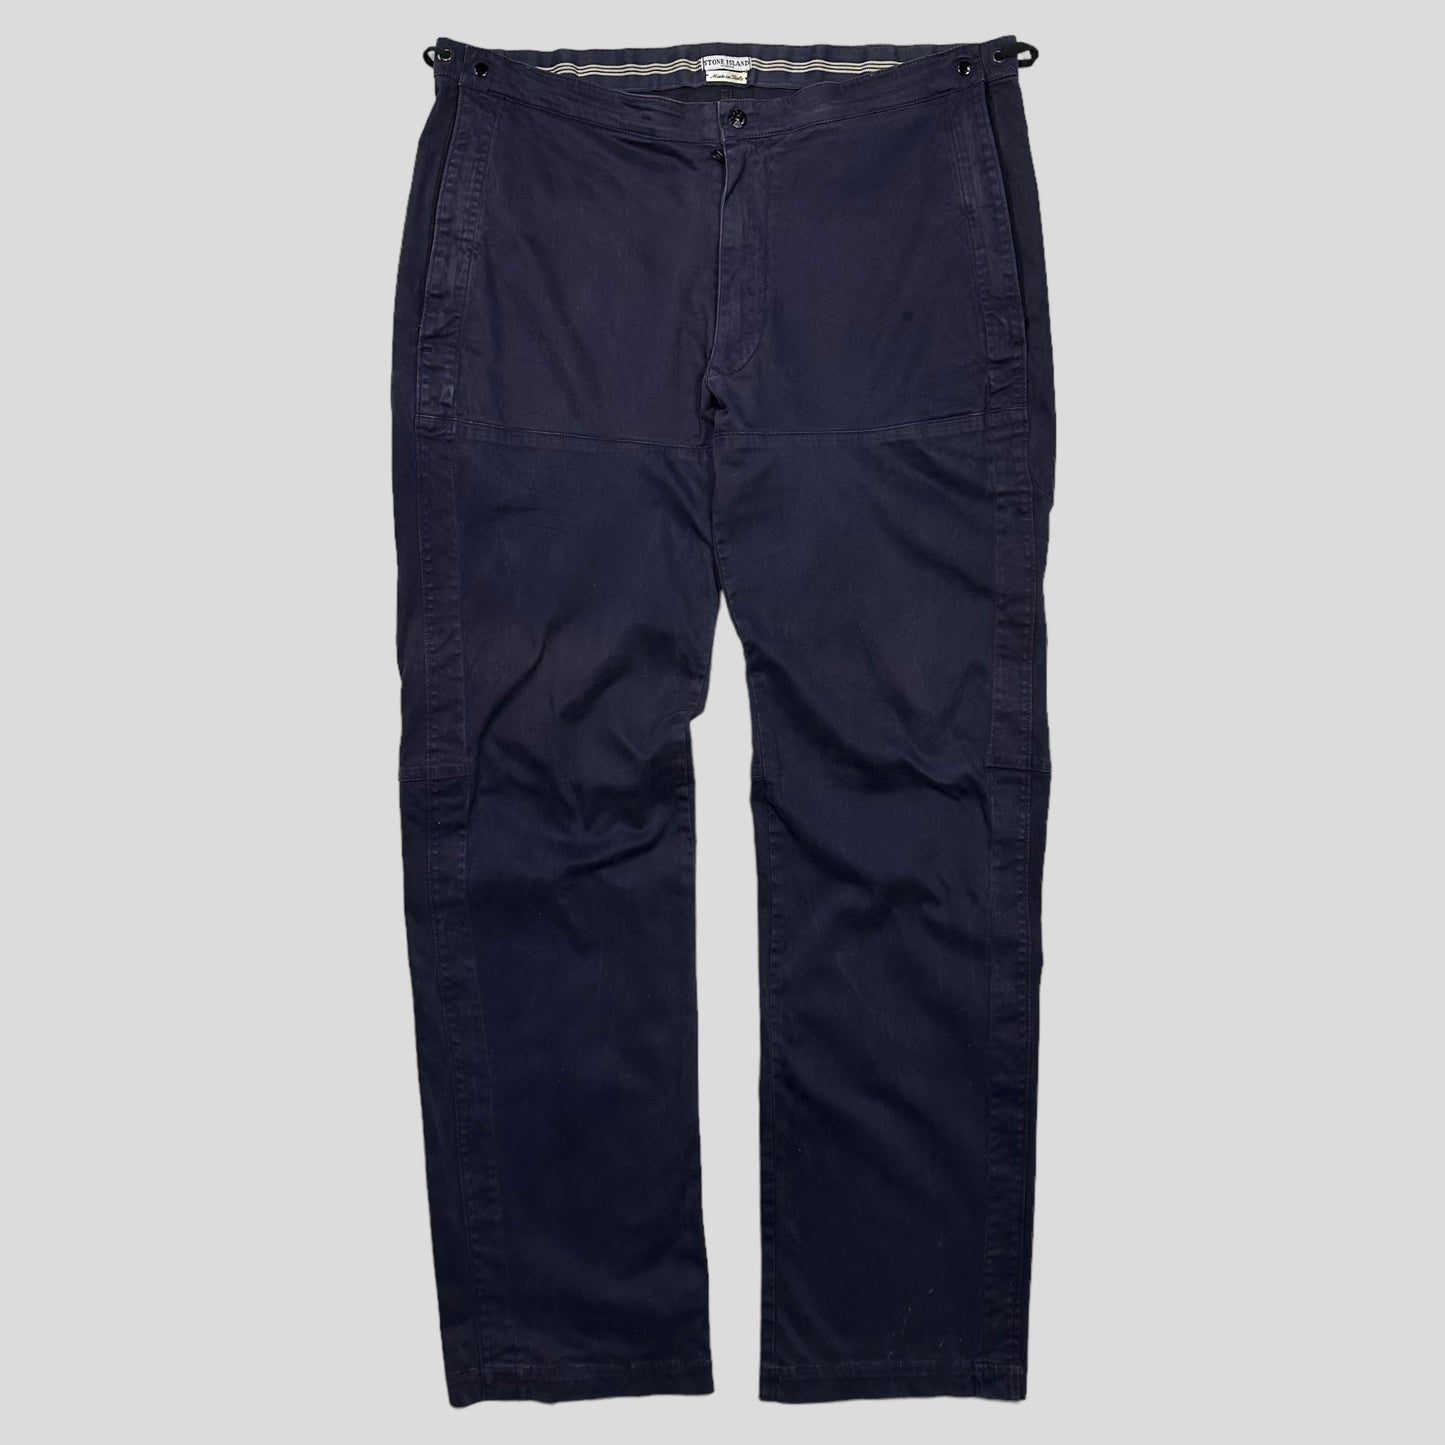 Stone Island AW04 Heavy Cotton Spellout Carpenter Trousers - 36-40